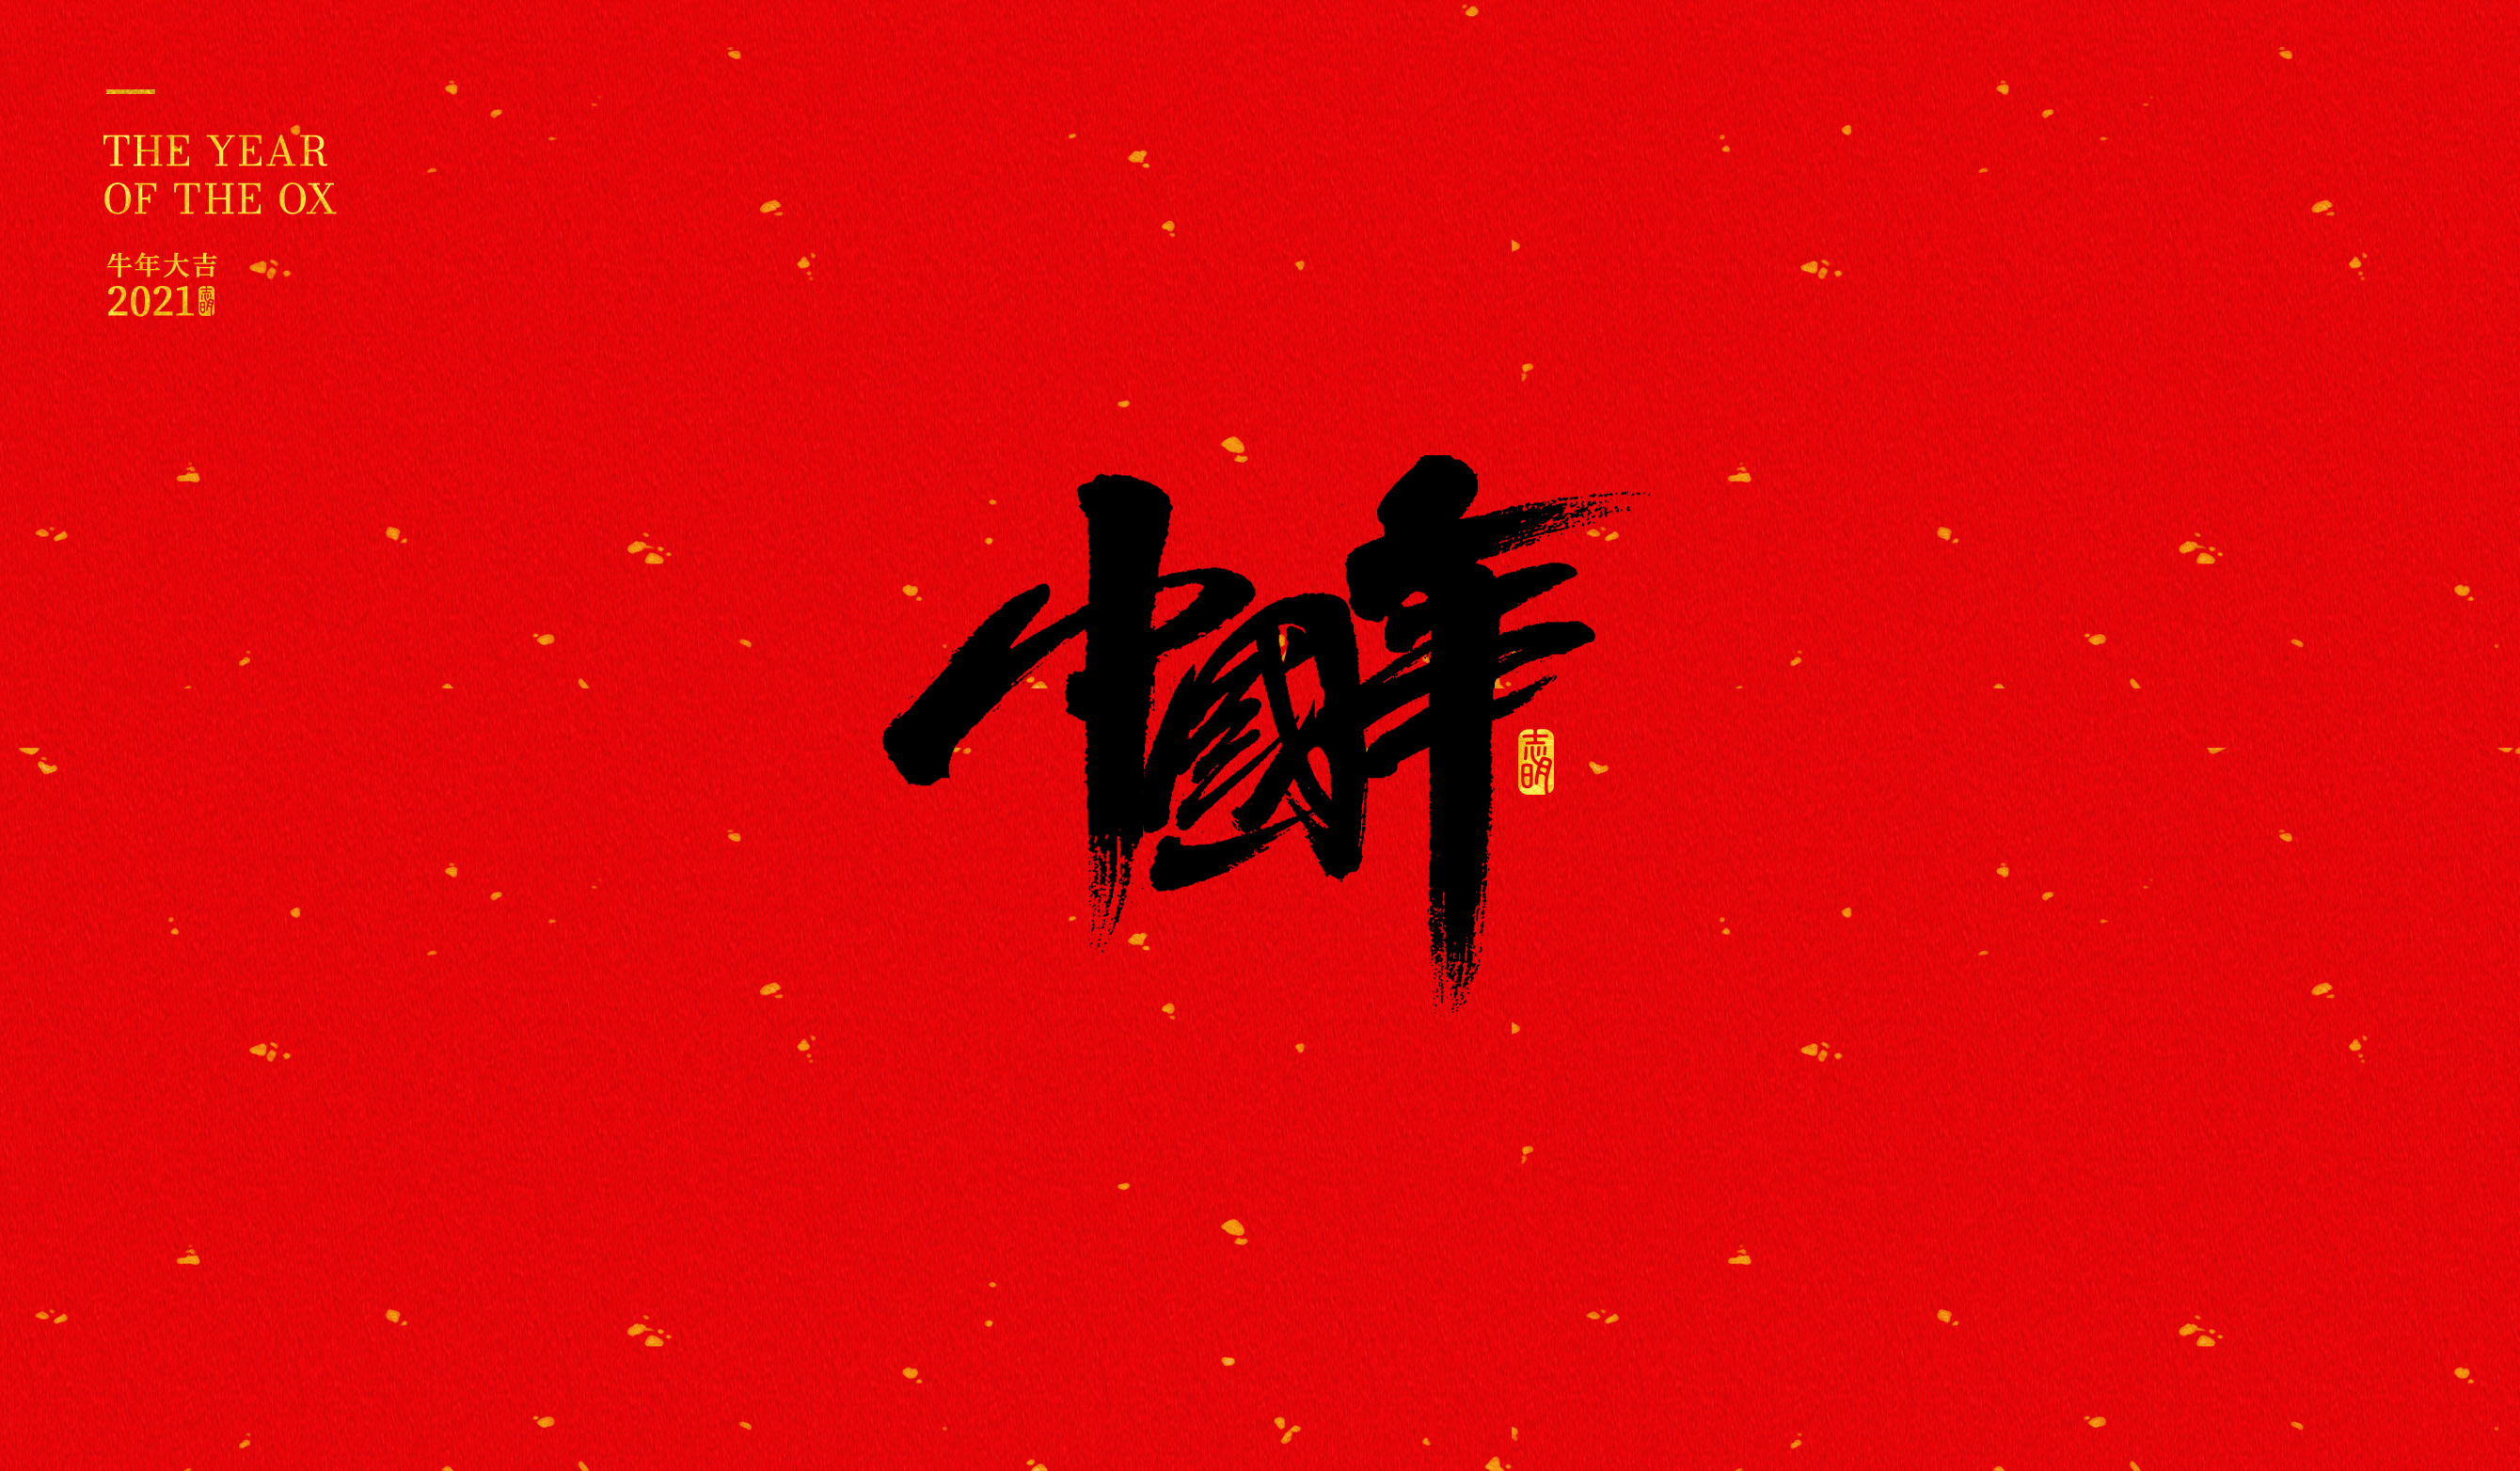 Year of the Ox greetings free commercial fonts